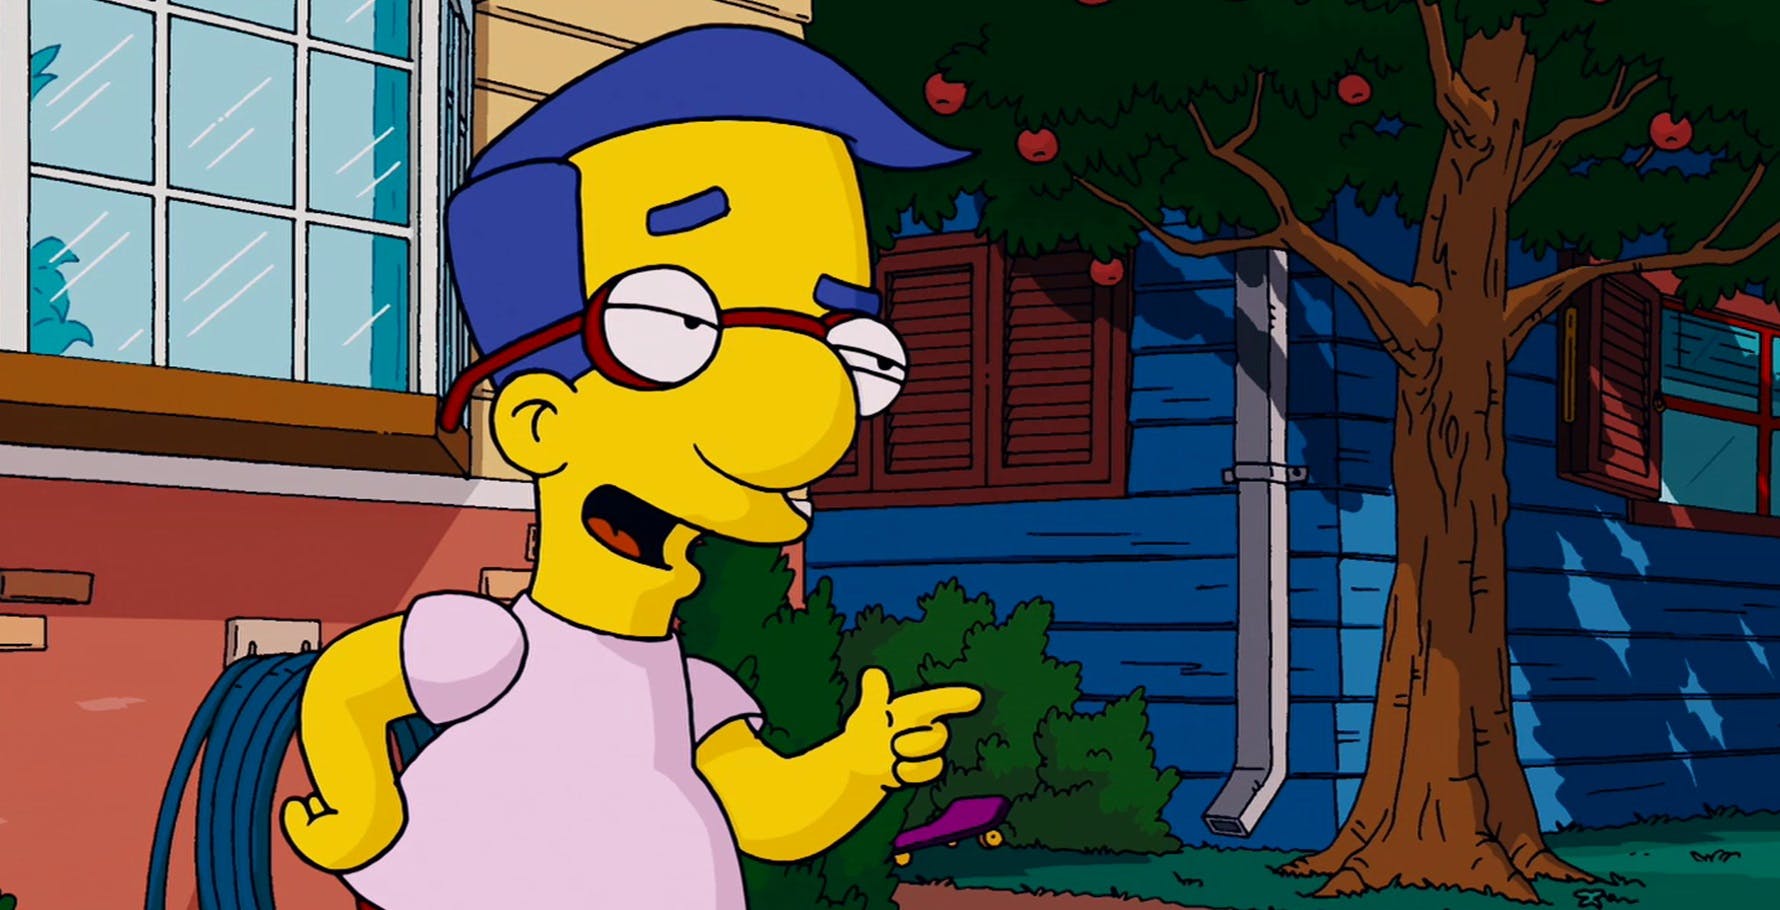 If You Get More Than 12/15 on This General Knowledge Quiz, You Are Too Smart The Simpsons Milhouse